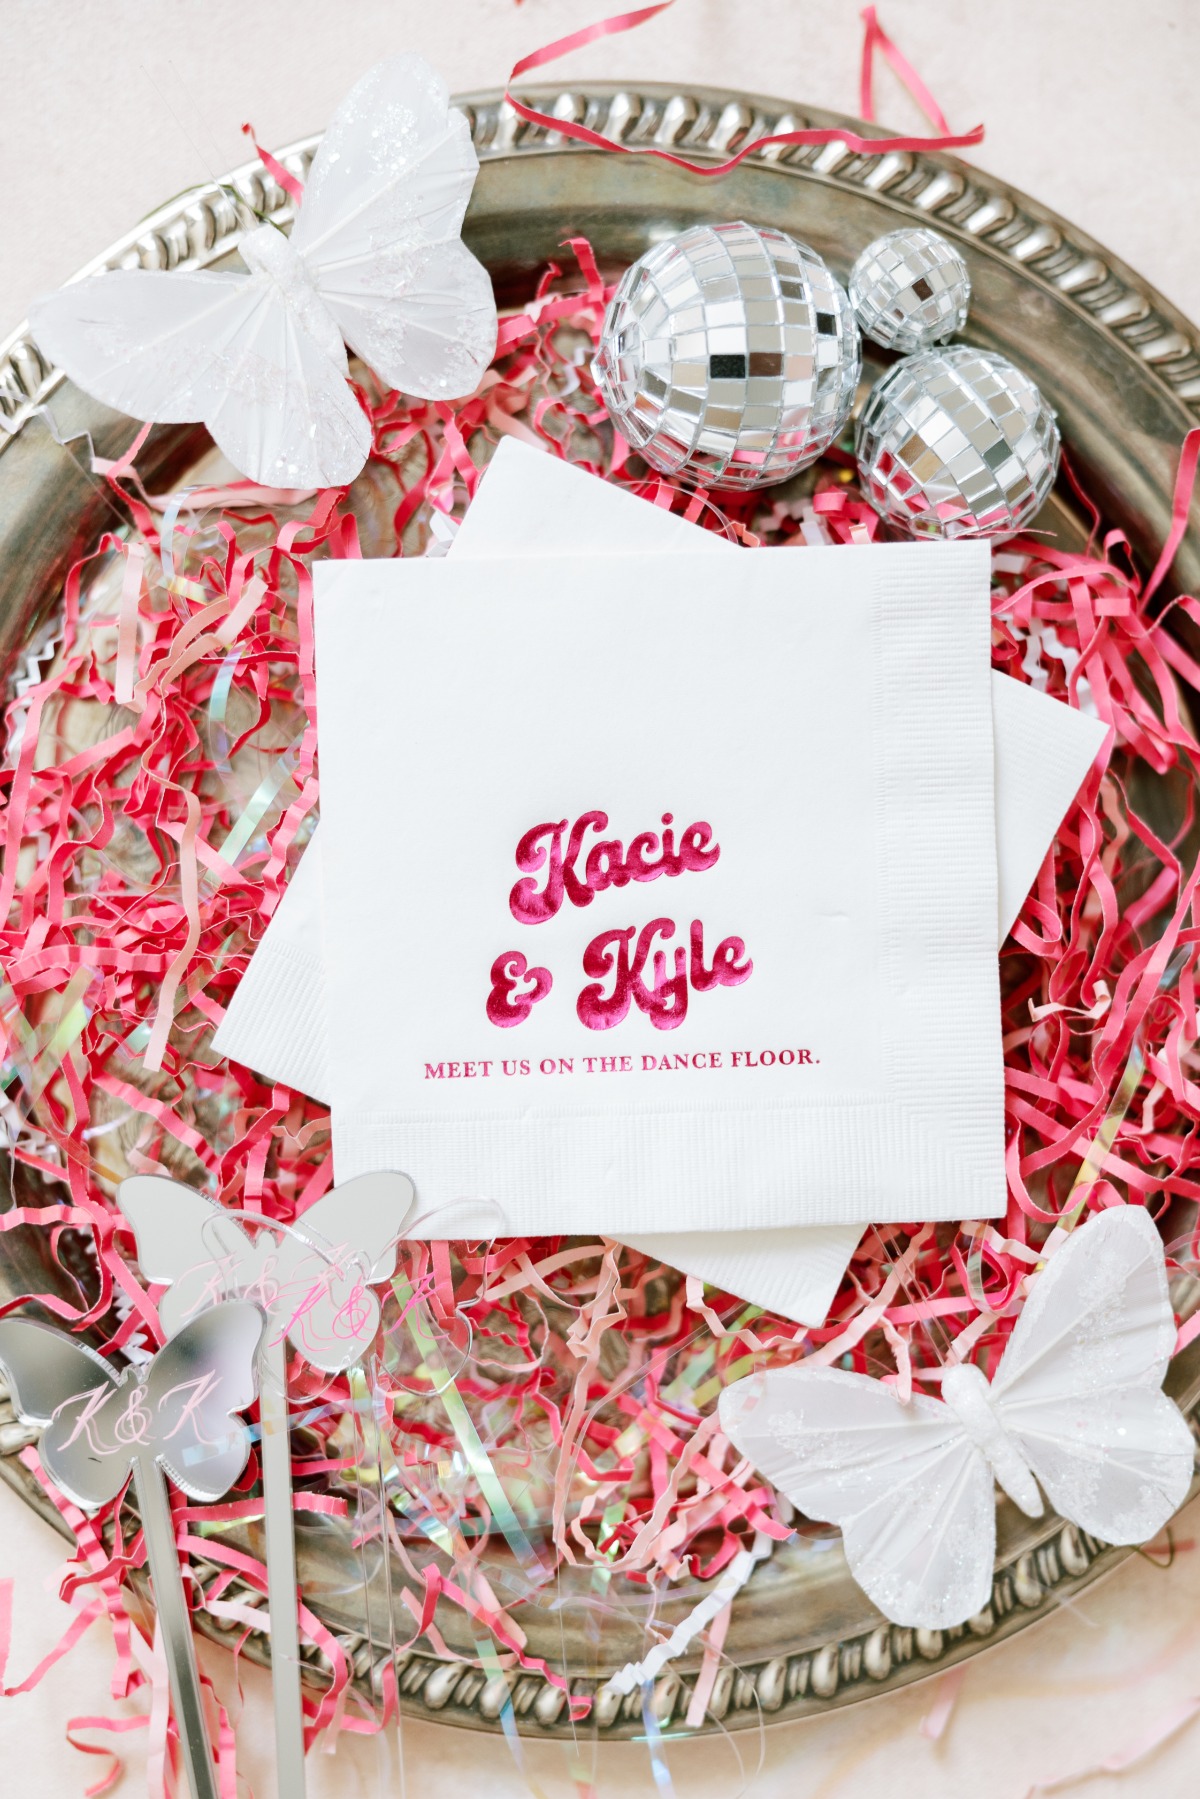 Custom cocktail napkins with iridescent pink welcome message